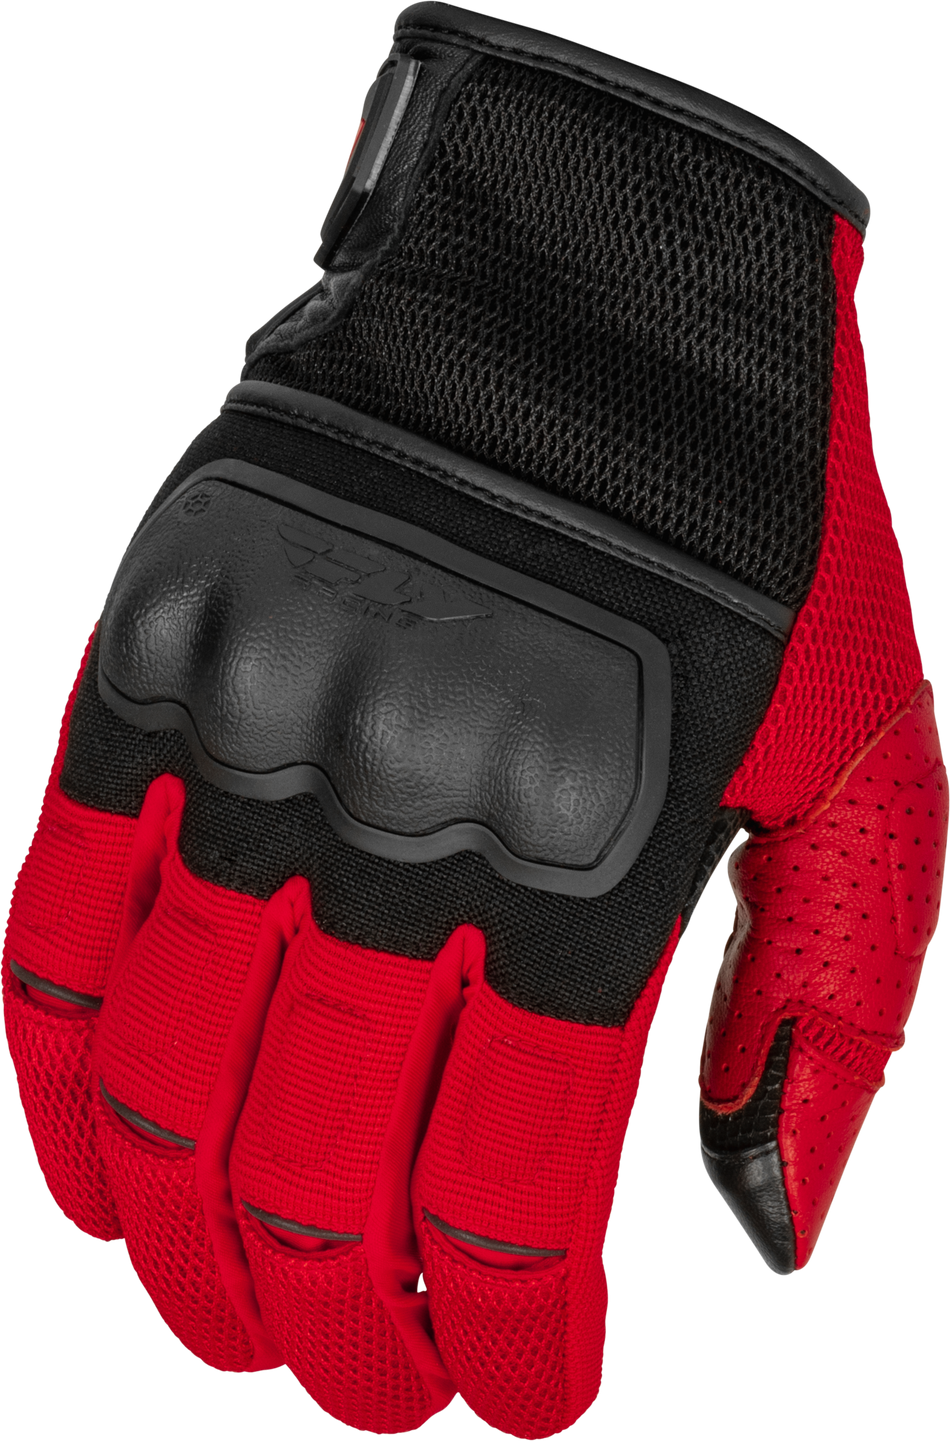 FLY RACING Coolpro Force Gloves Black/Red Lg 476-4129L